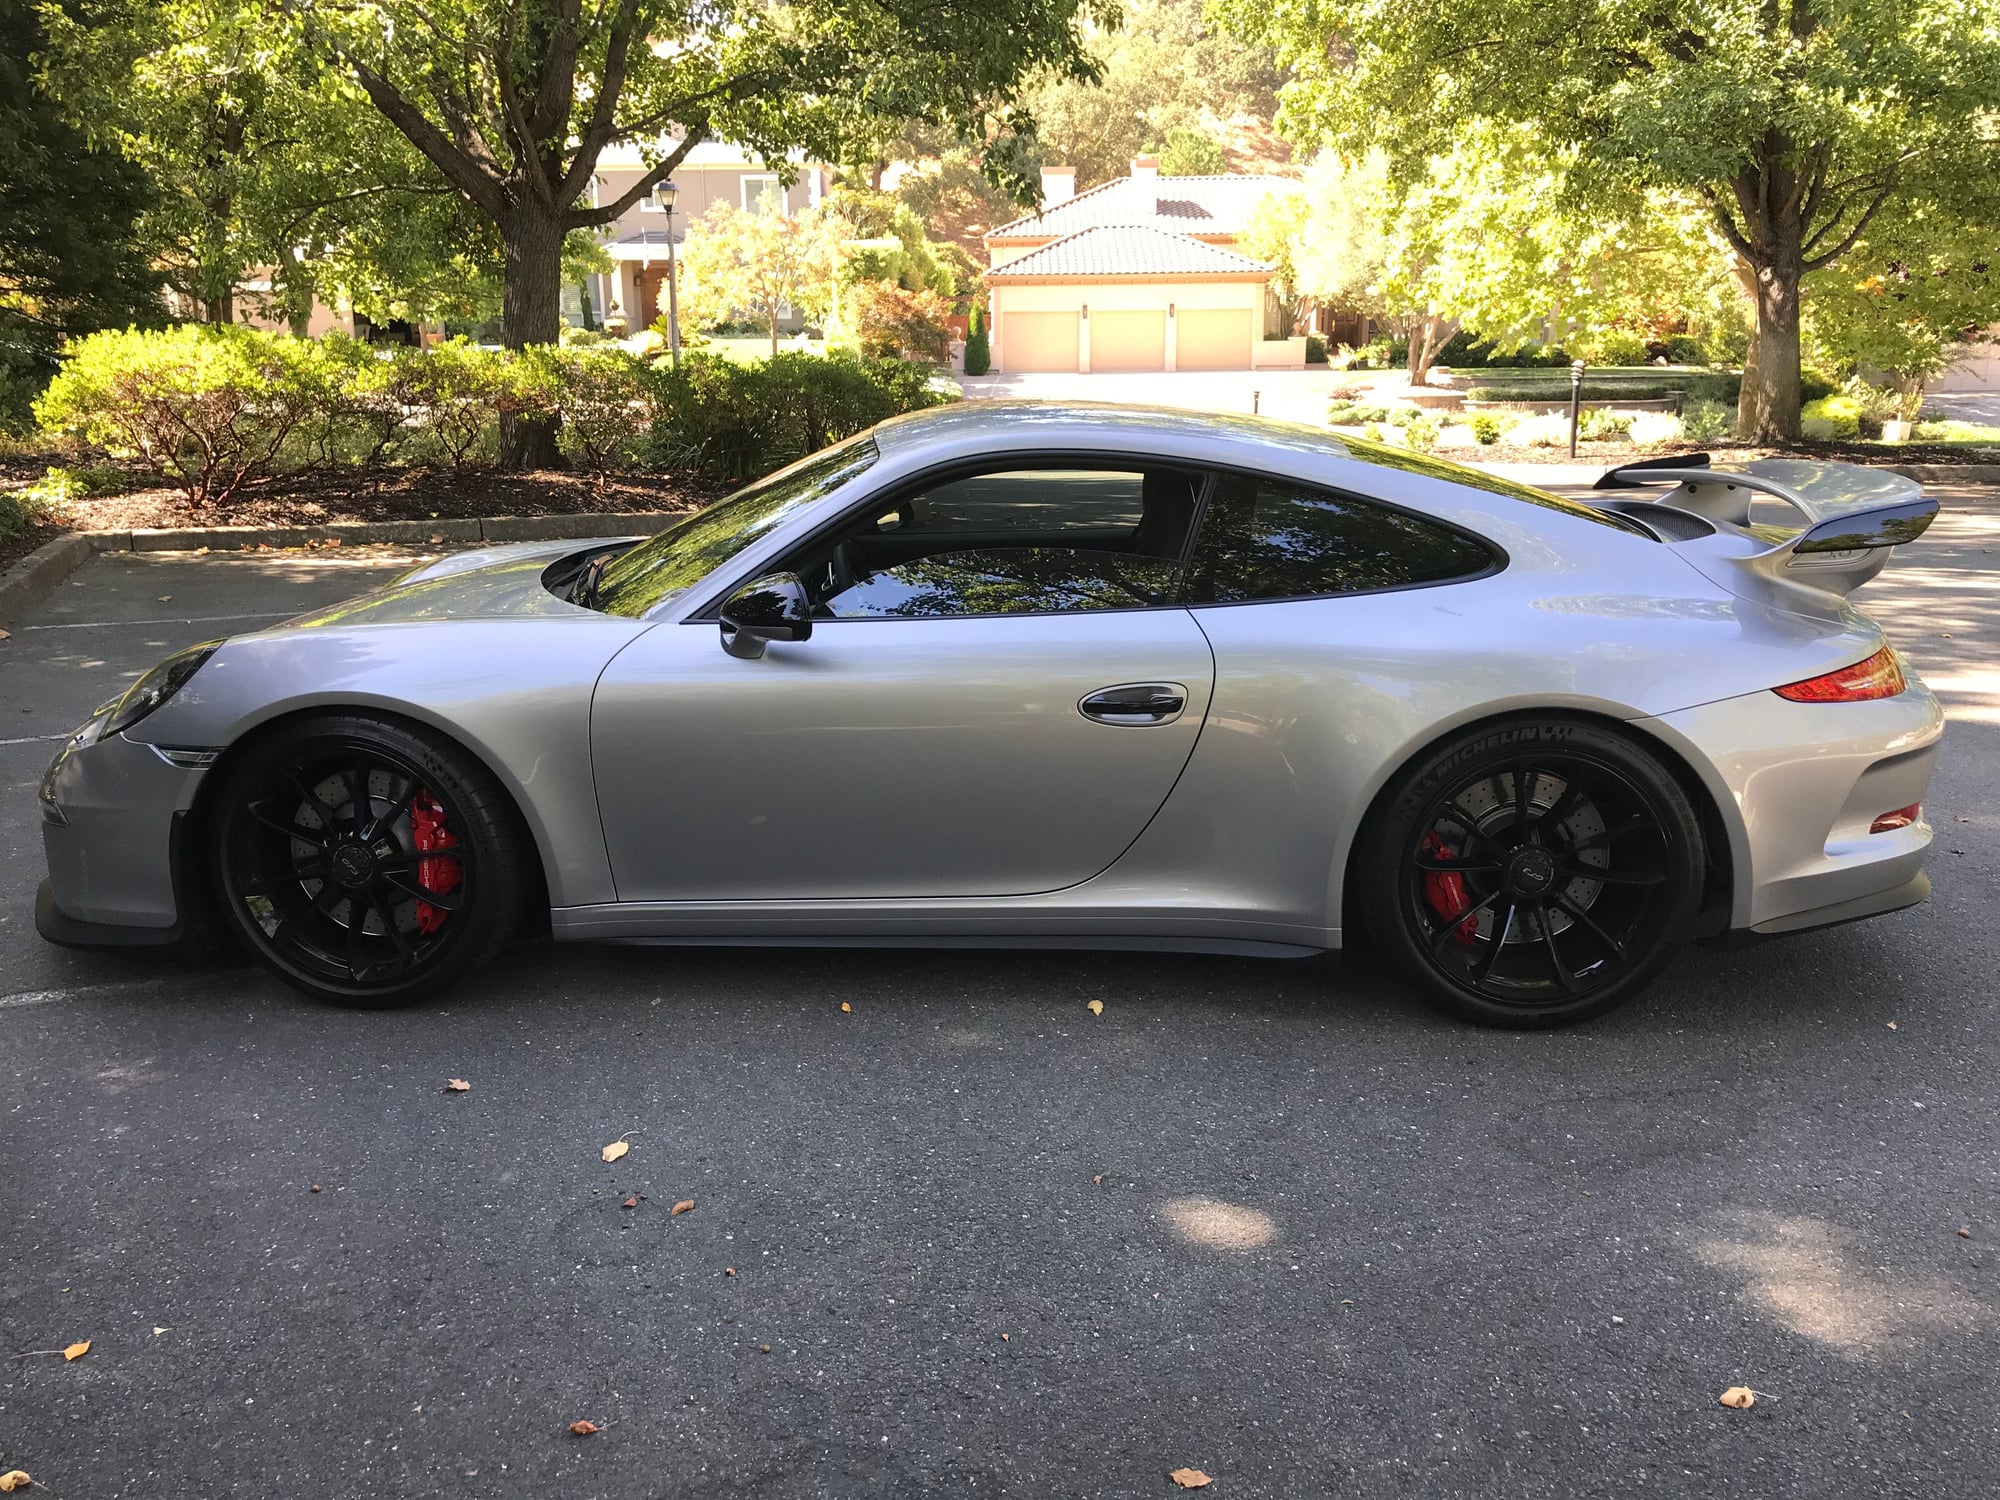 2014 Porsche GT3 - 2014 GT3 with G engine fitted for sale. - Used - VIN WP0AC2A92ES183644 - 39,900 Miles - 6 cyl - 2WD - Automatic - Coupe - Silver - Danville, CA 94526, United States